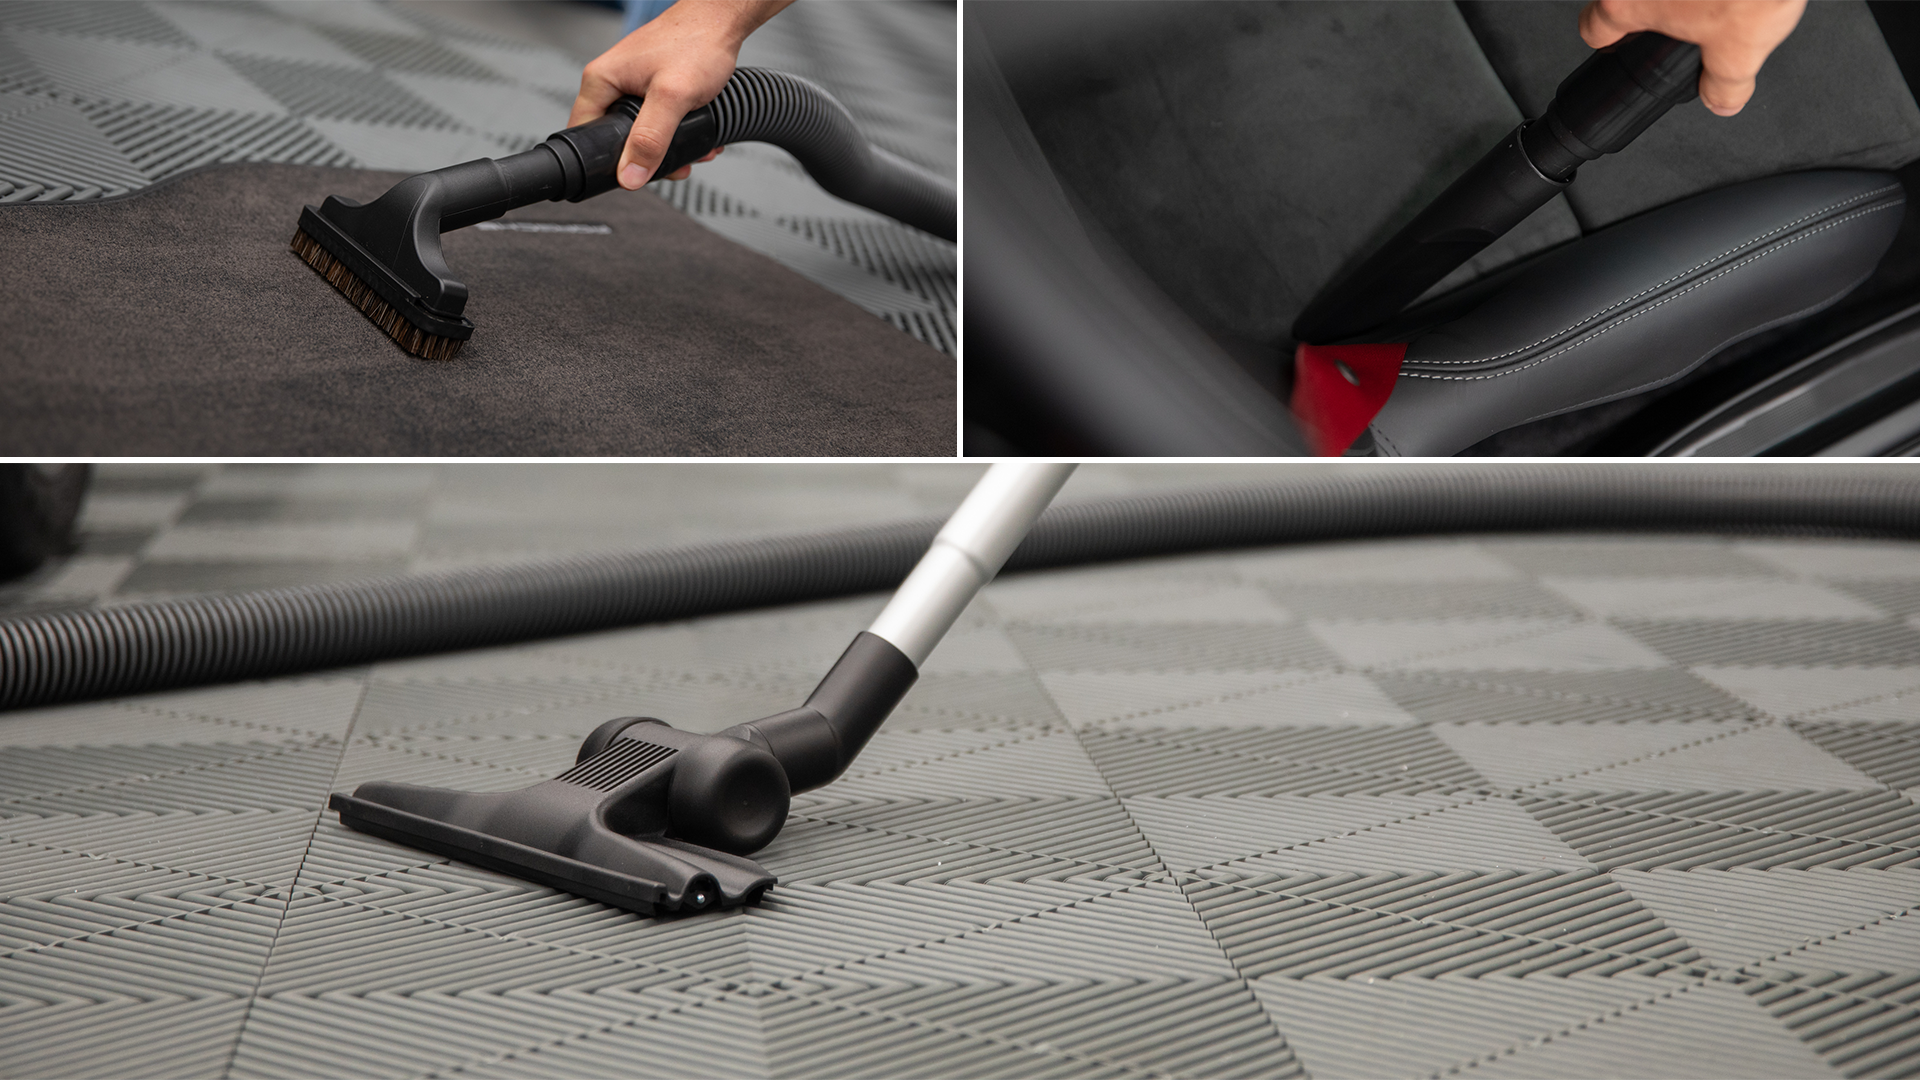 Obsessed Garage Vacuum Attachments for Car Interior Cleaning 